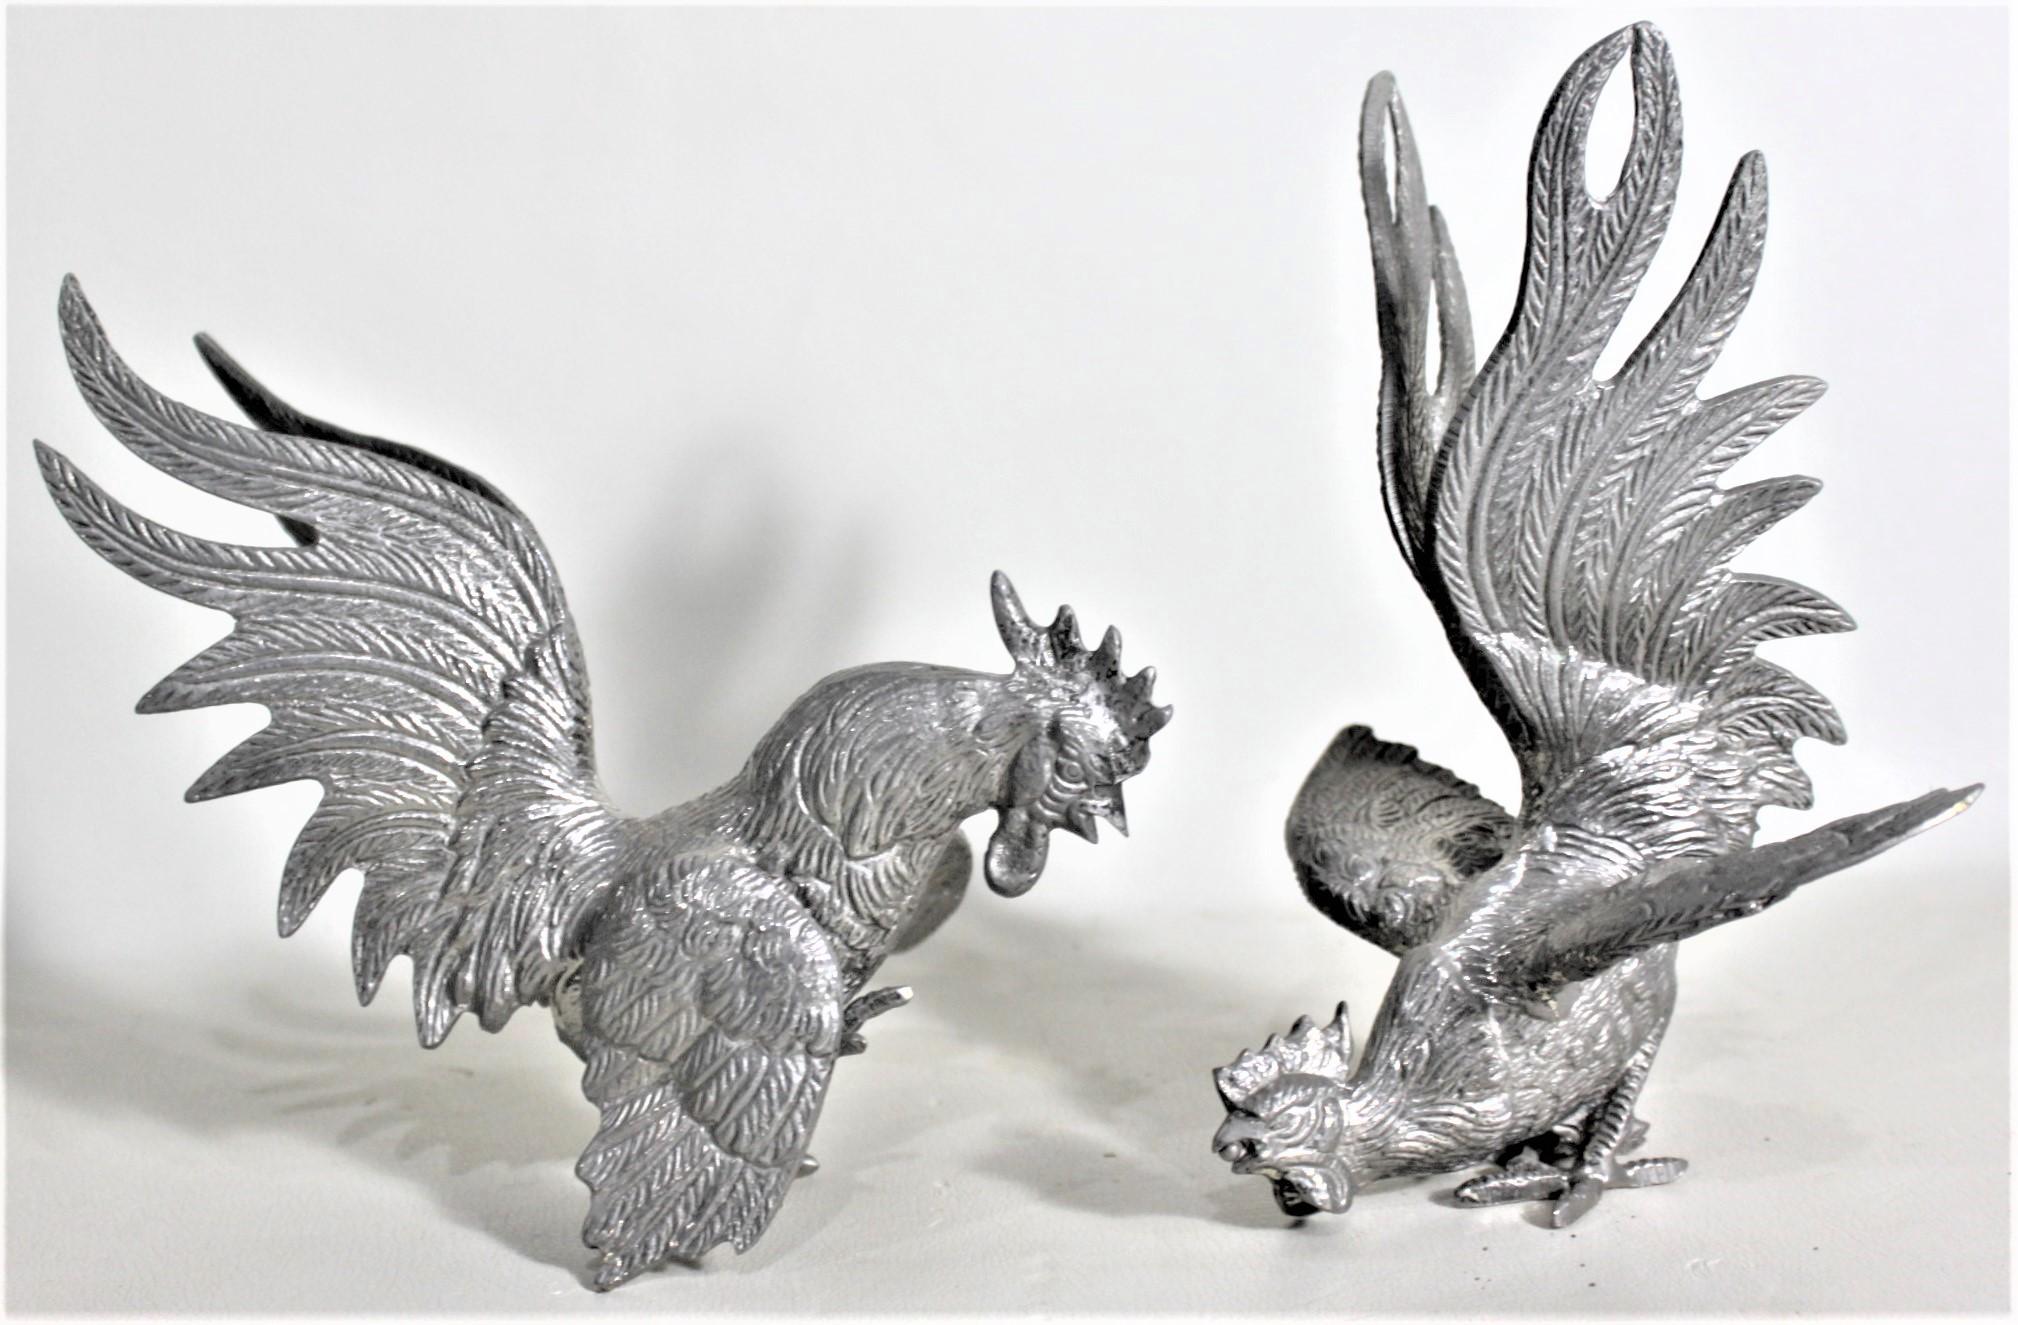 Brass Pair of Ornate Silver Plated Fighting Rooster or Cockerel Table Sculptures For Sale